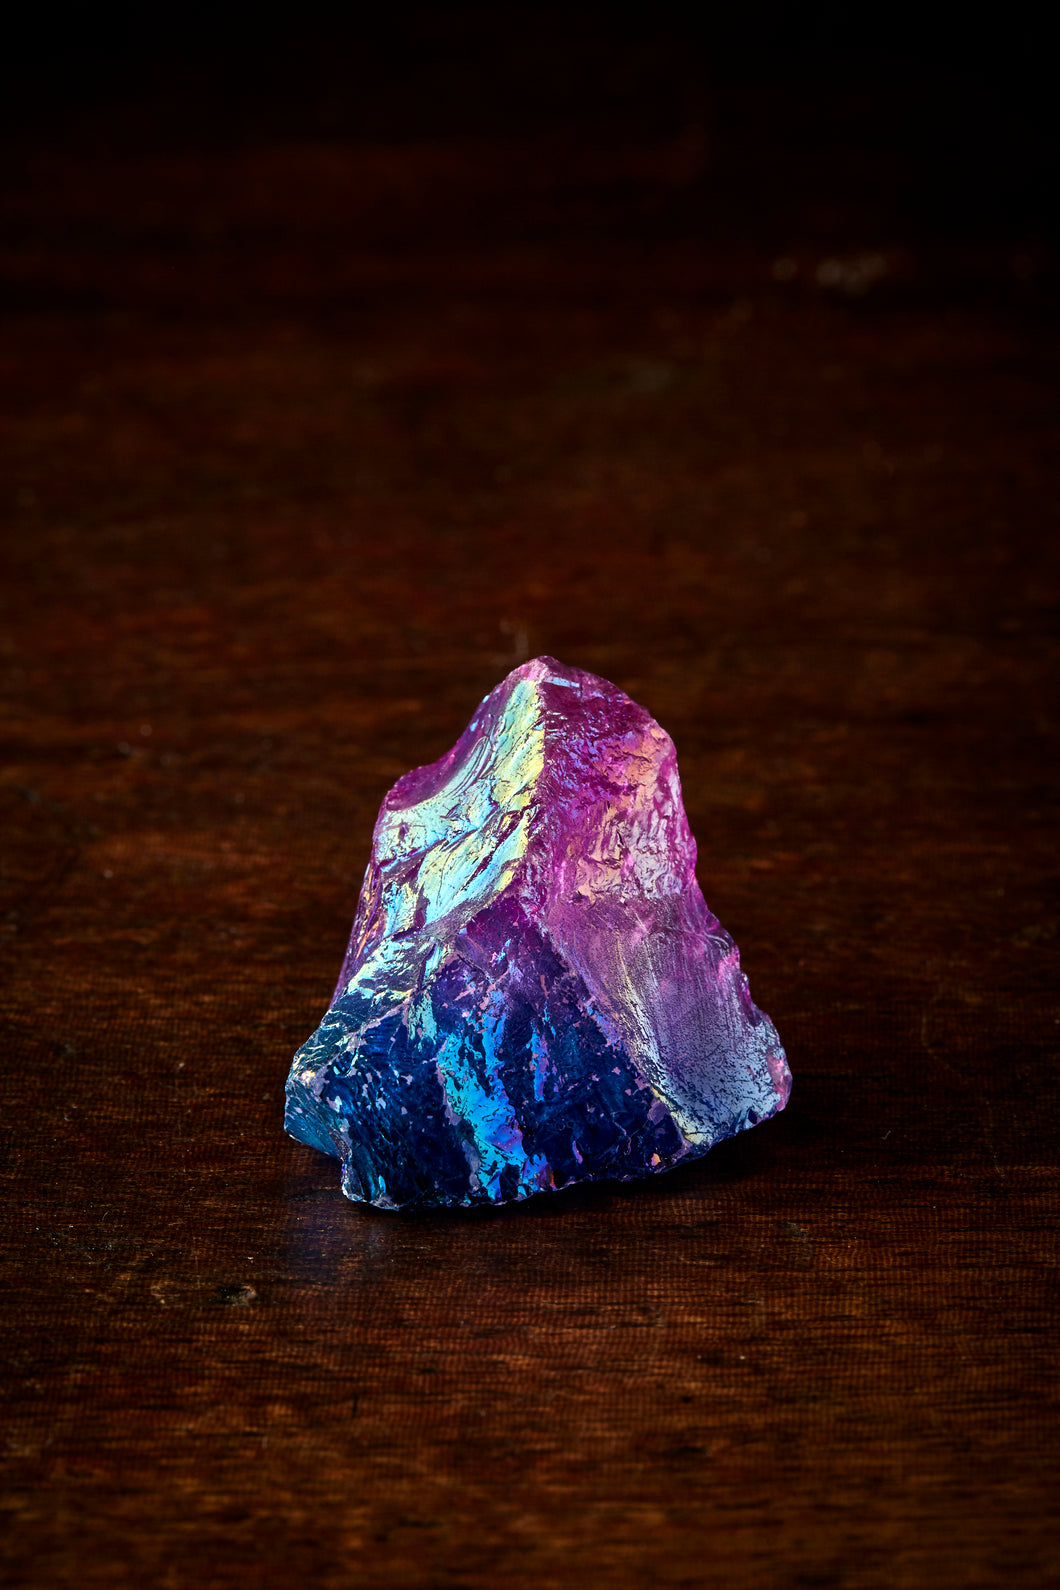 Image of a blue Fire Rock, otherwise known as quartz stones plated in different metals to provide a rainbow sheen